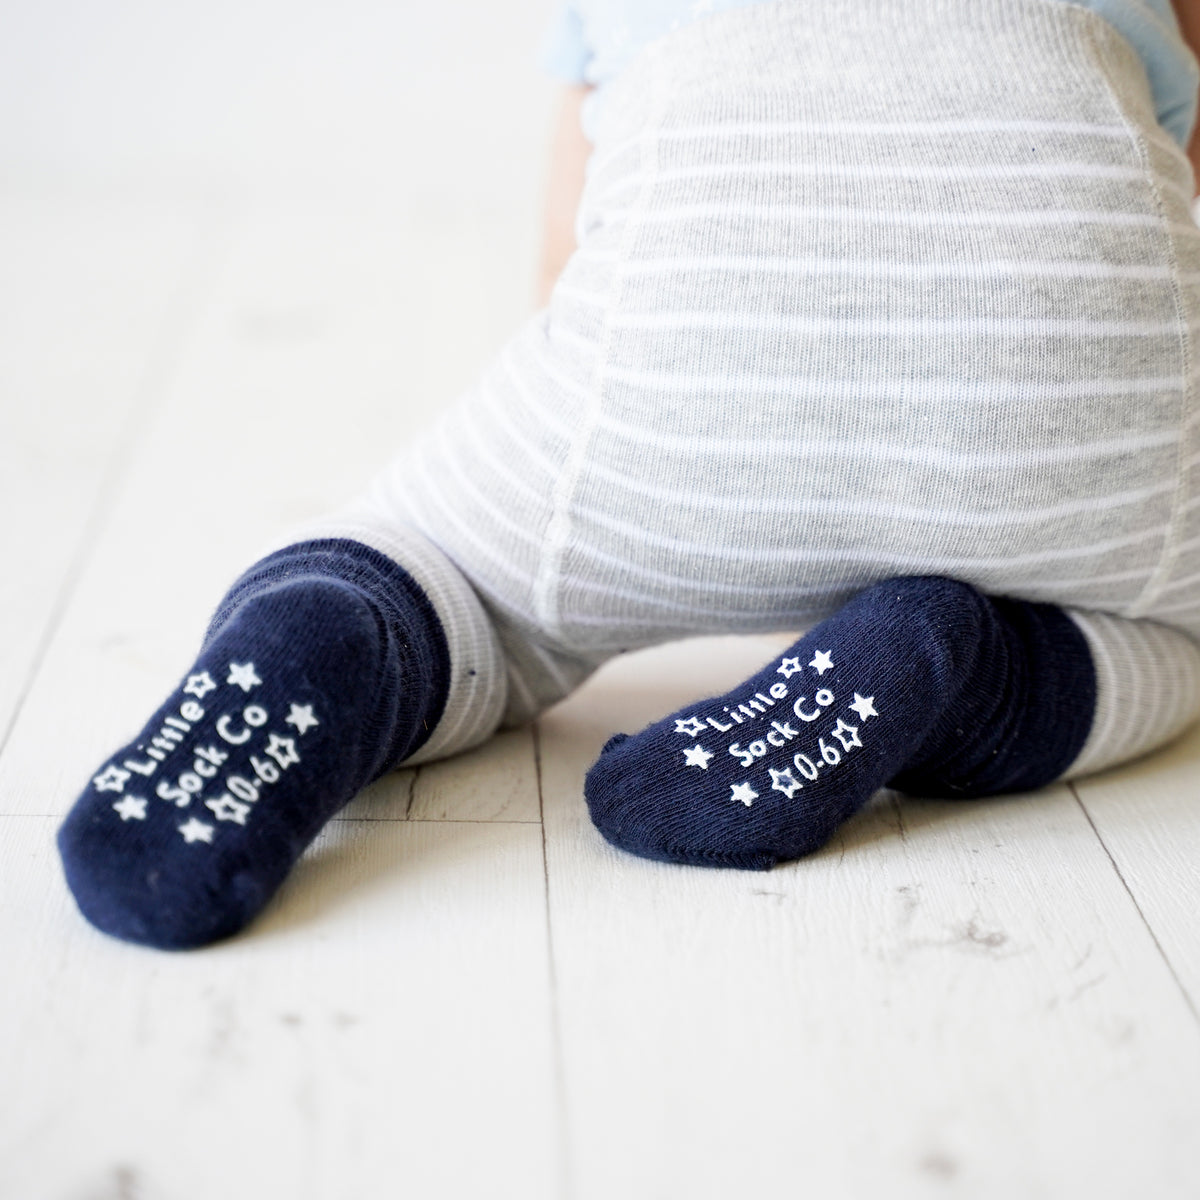 Non-Slip Stay On Baby and Toddler Socks - 3 Pack in Smarty Stripe, Blue & Navy